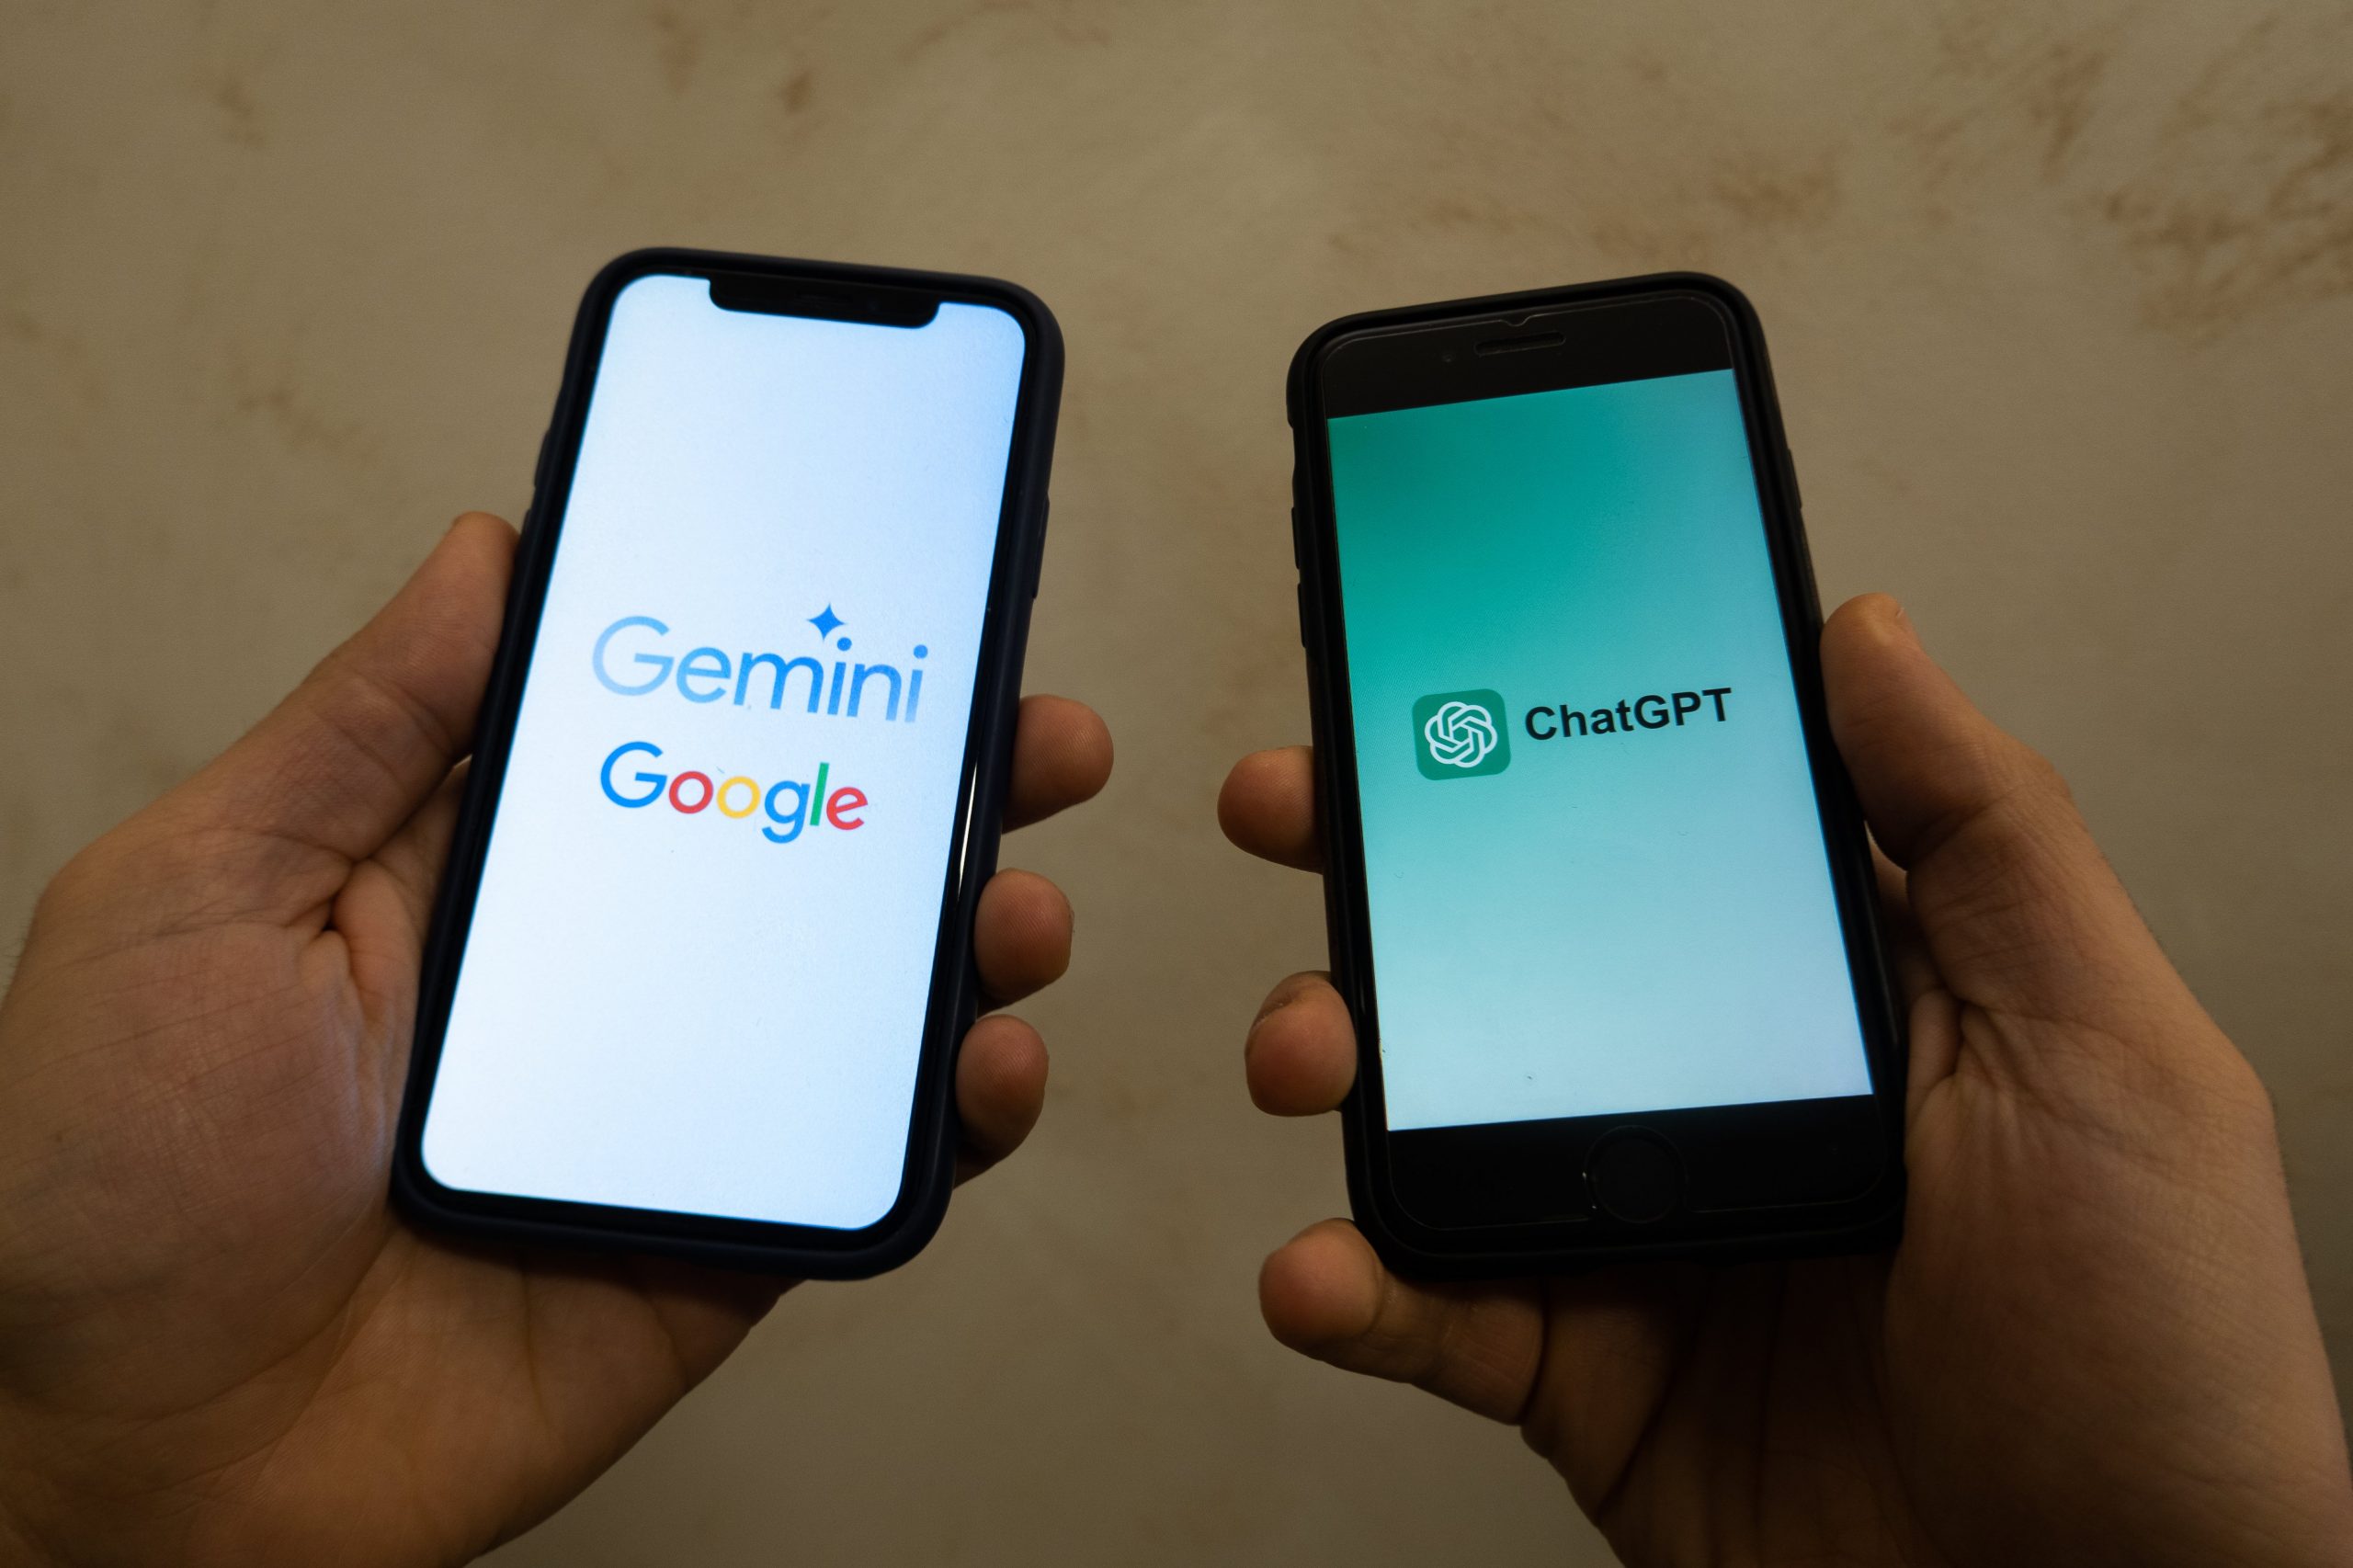 The Google and OpenAI logos on smartphones